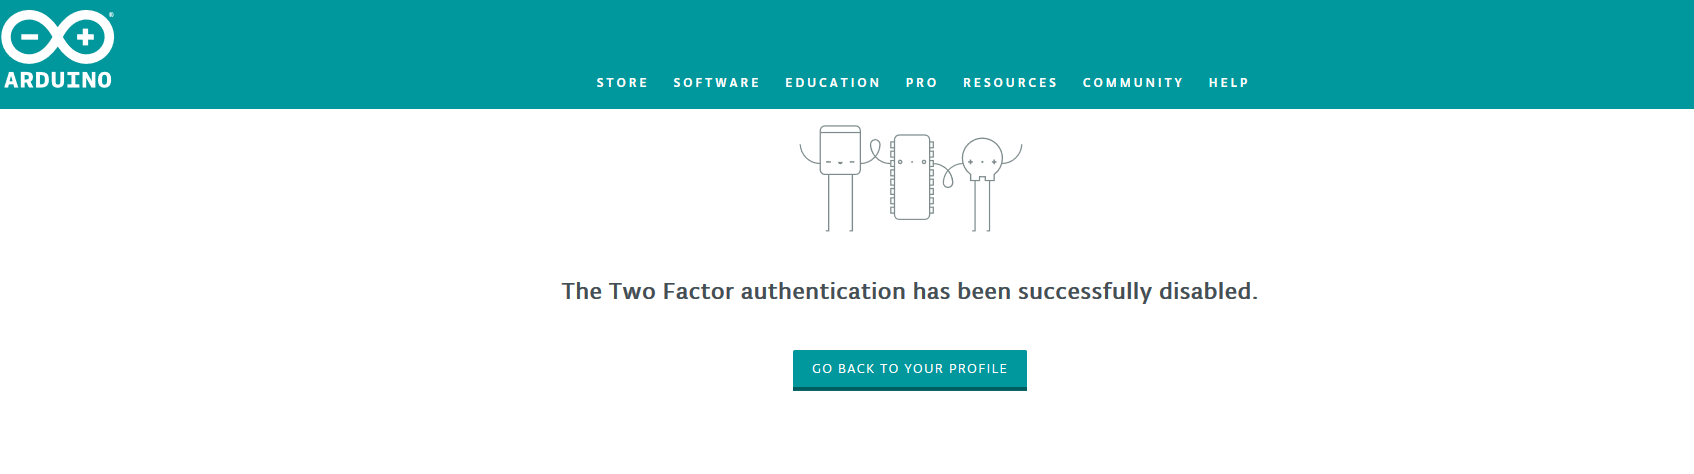 "The Two Factor authentication has been successfully disabled" written in profile page